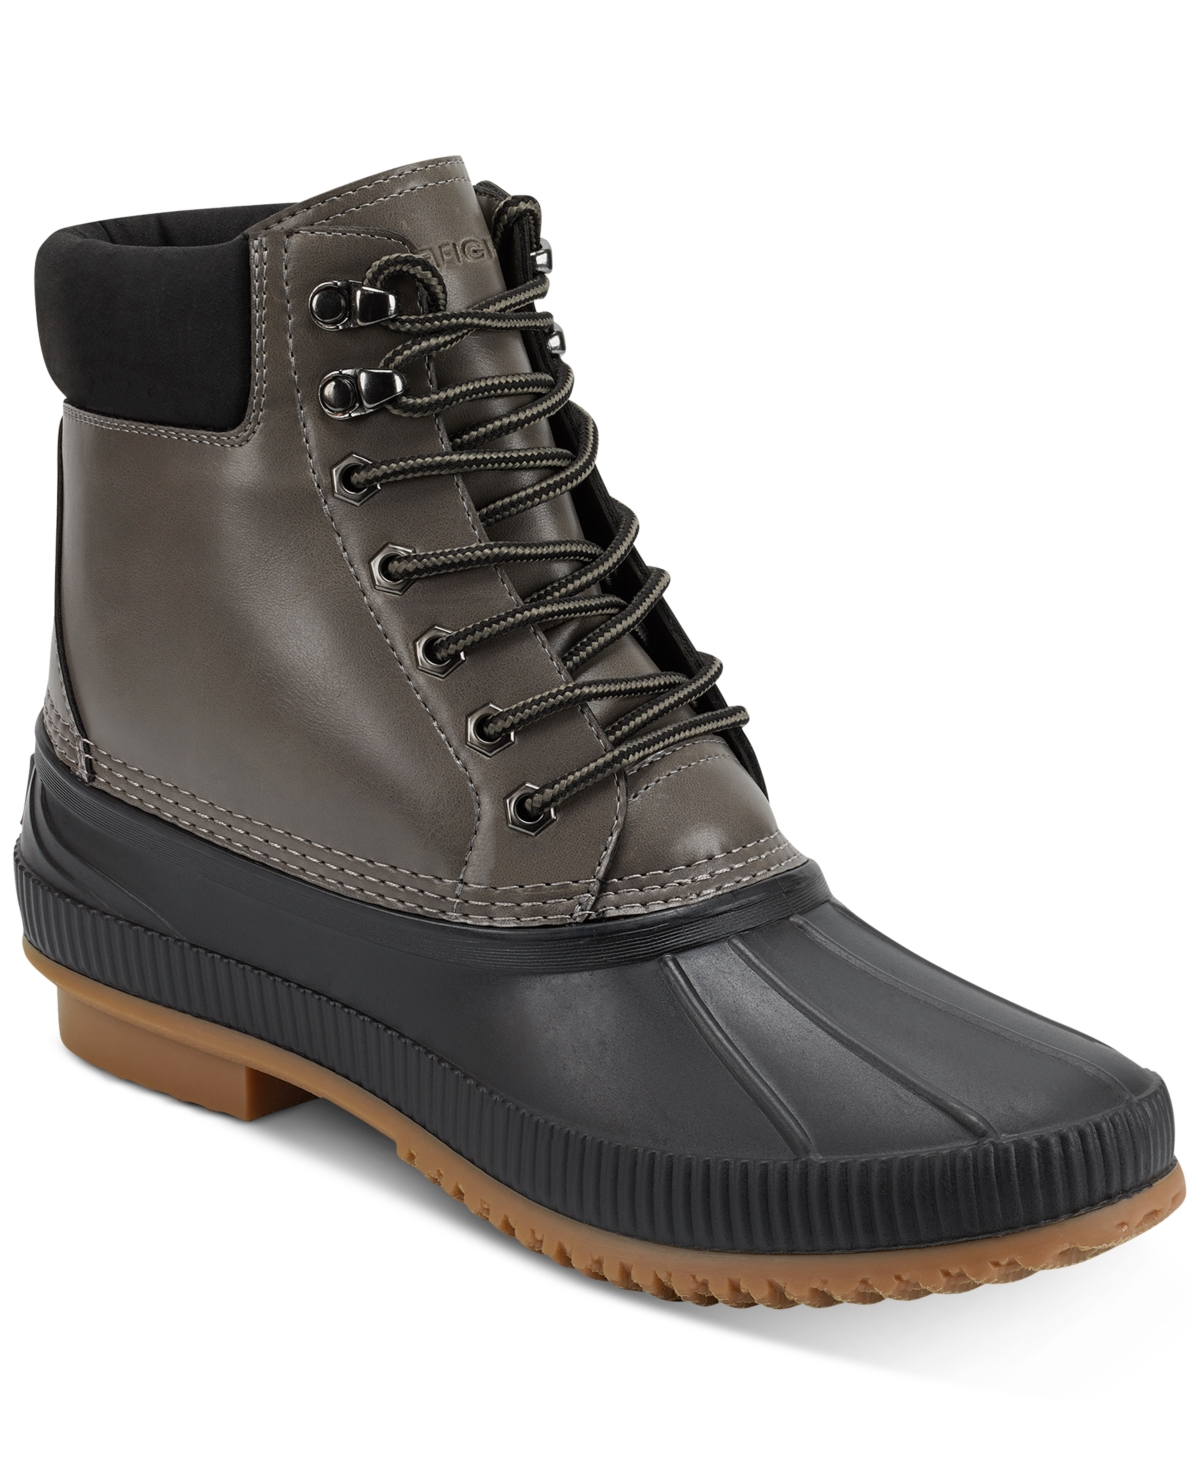 UPC 194009399200 product image for Tommy Hilfiger Men's Colins 2 Waterproof Duck Boots Men's Shoes | upcitemdb.com